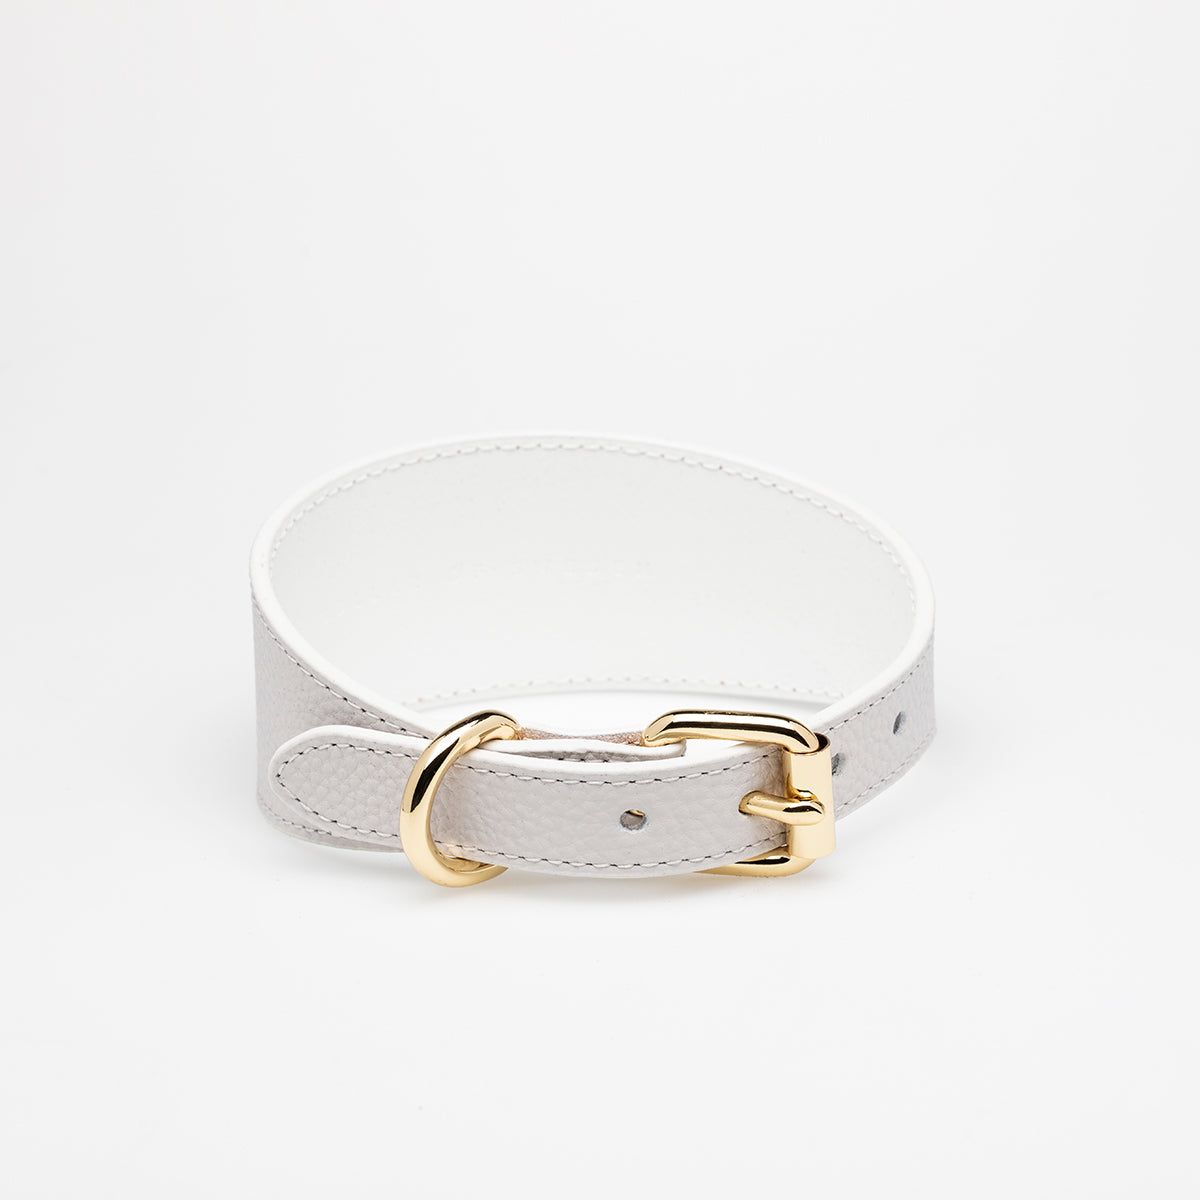 image - White Leather Collar XL Wide